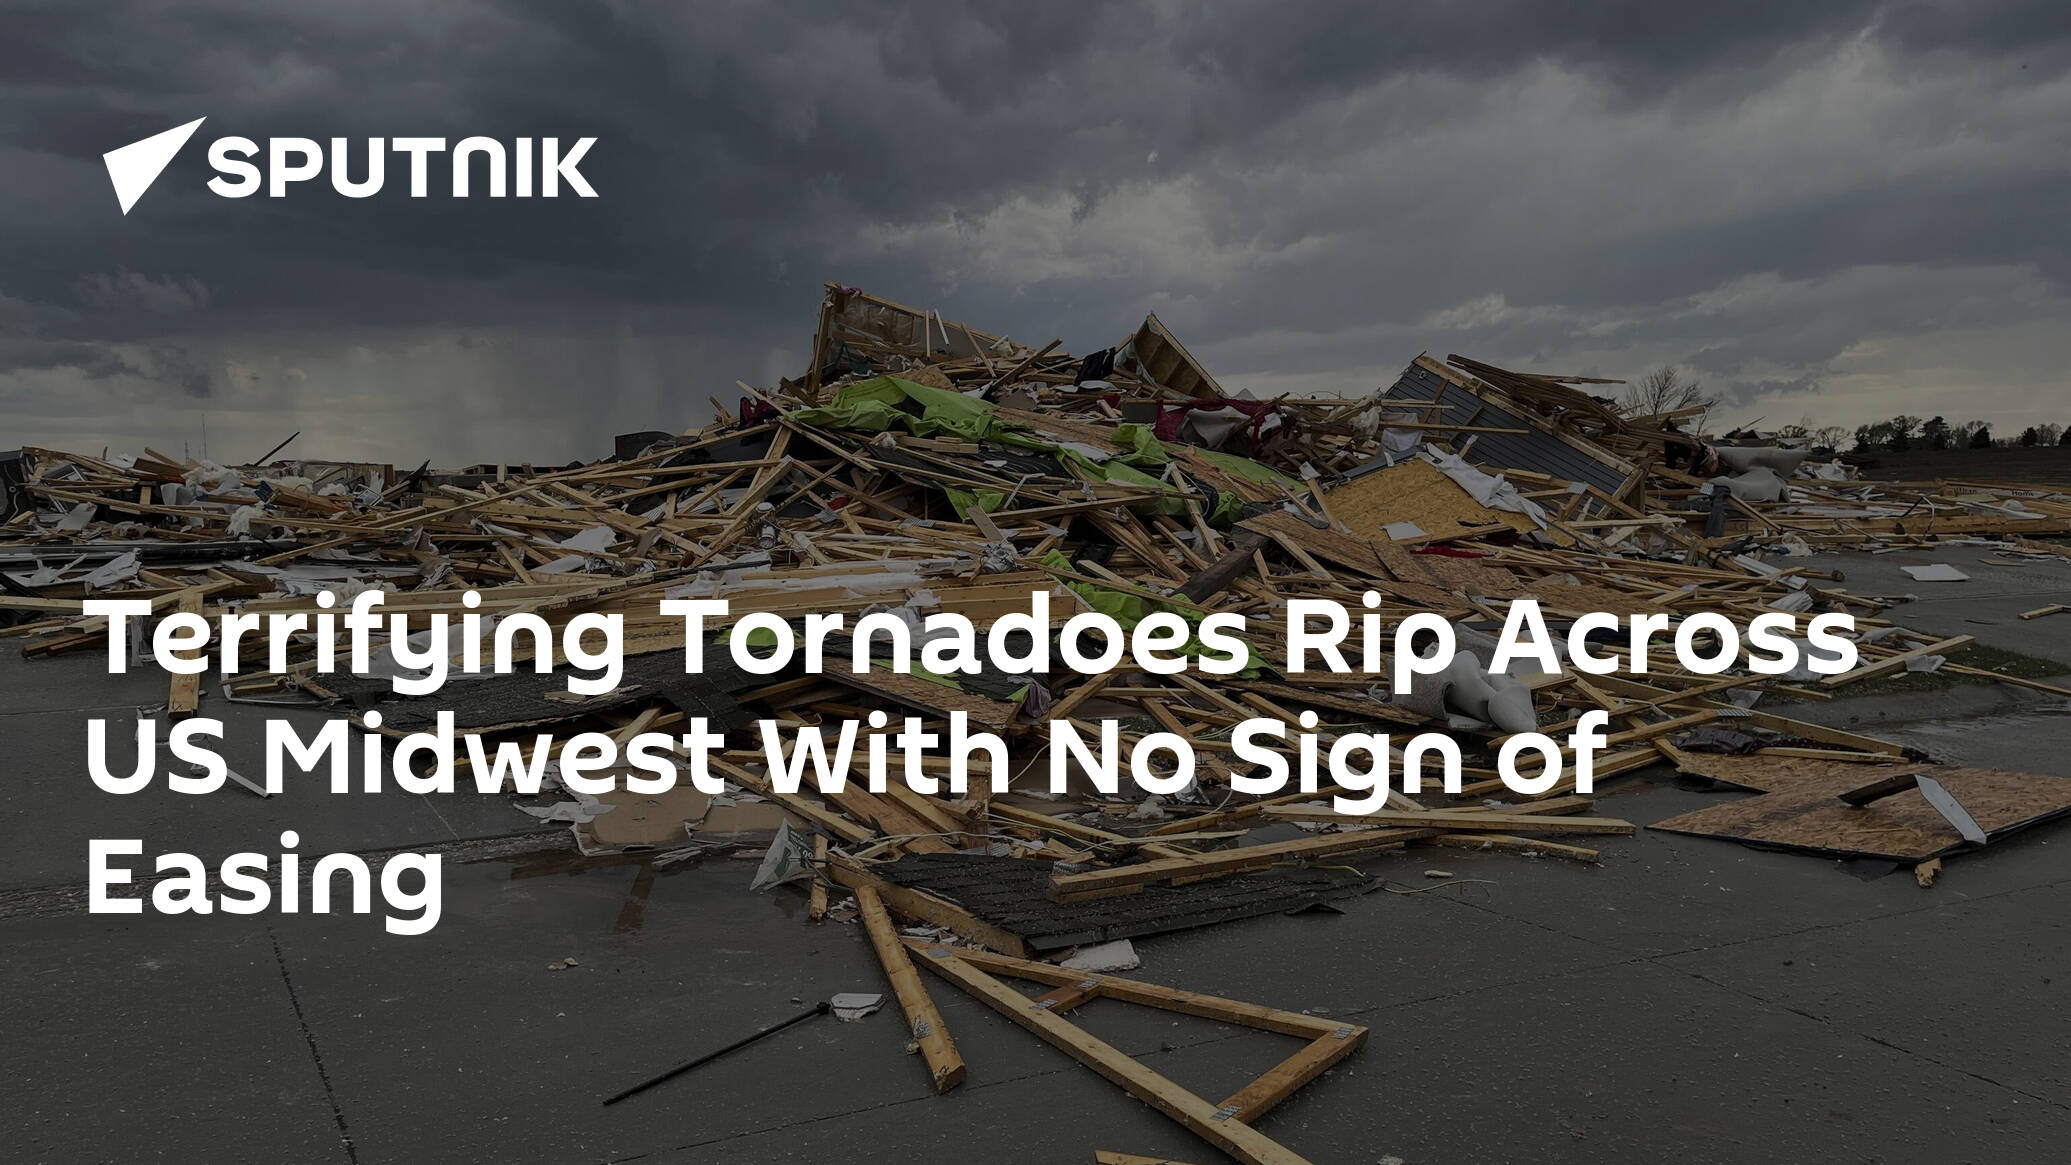 Terrifying Tornadoes Rip Across US Midwest With No Sign of Easing